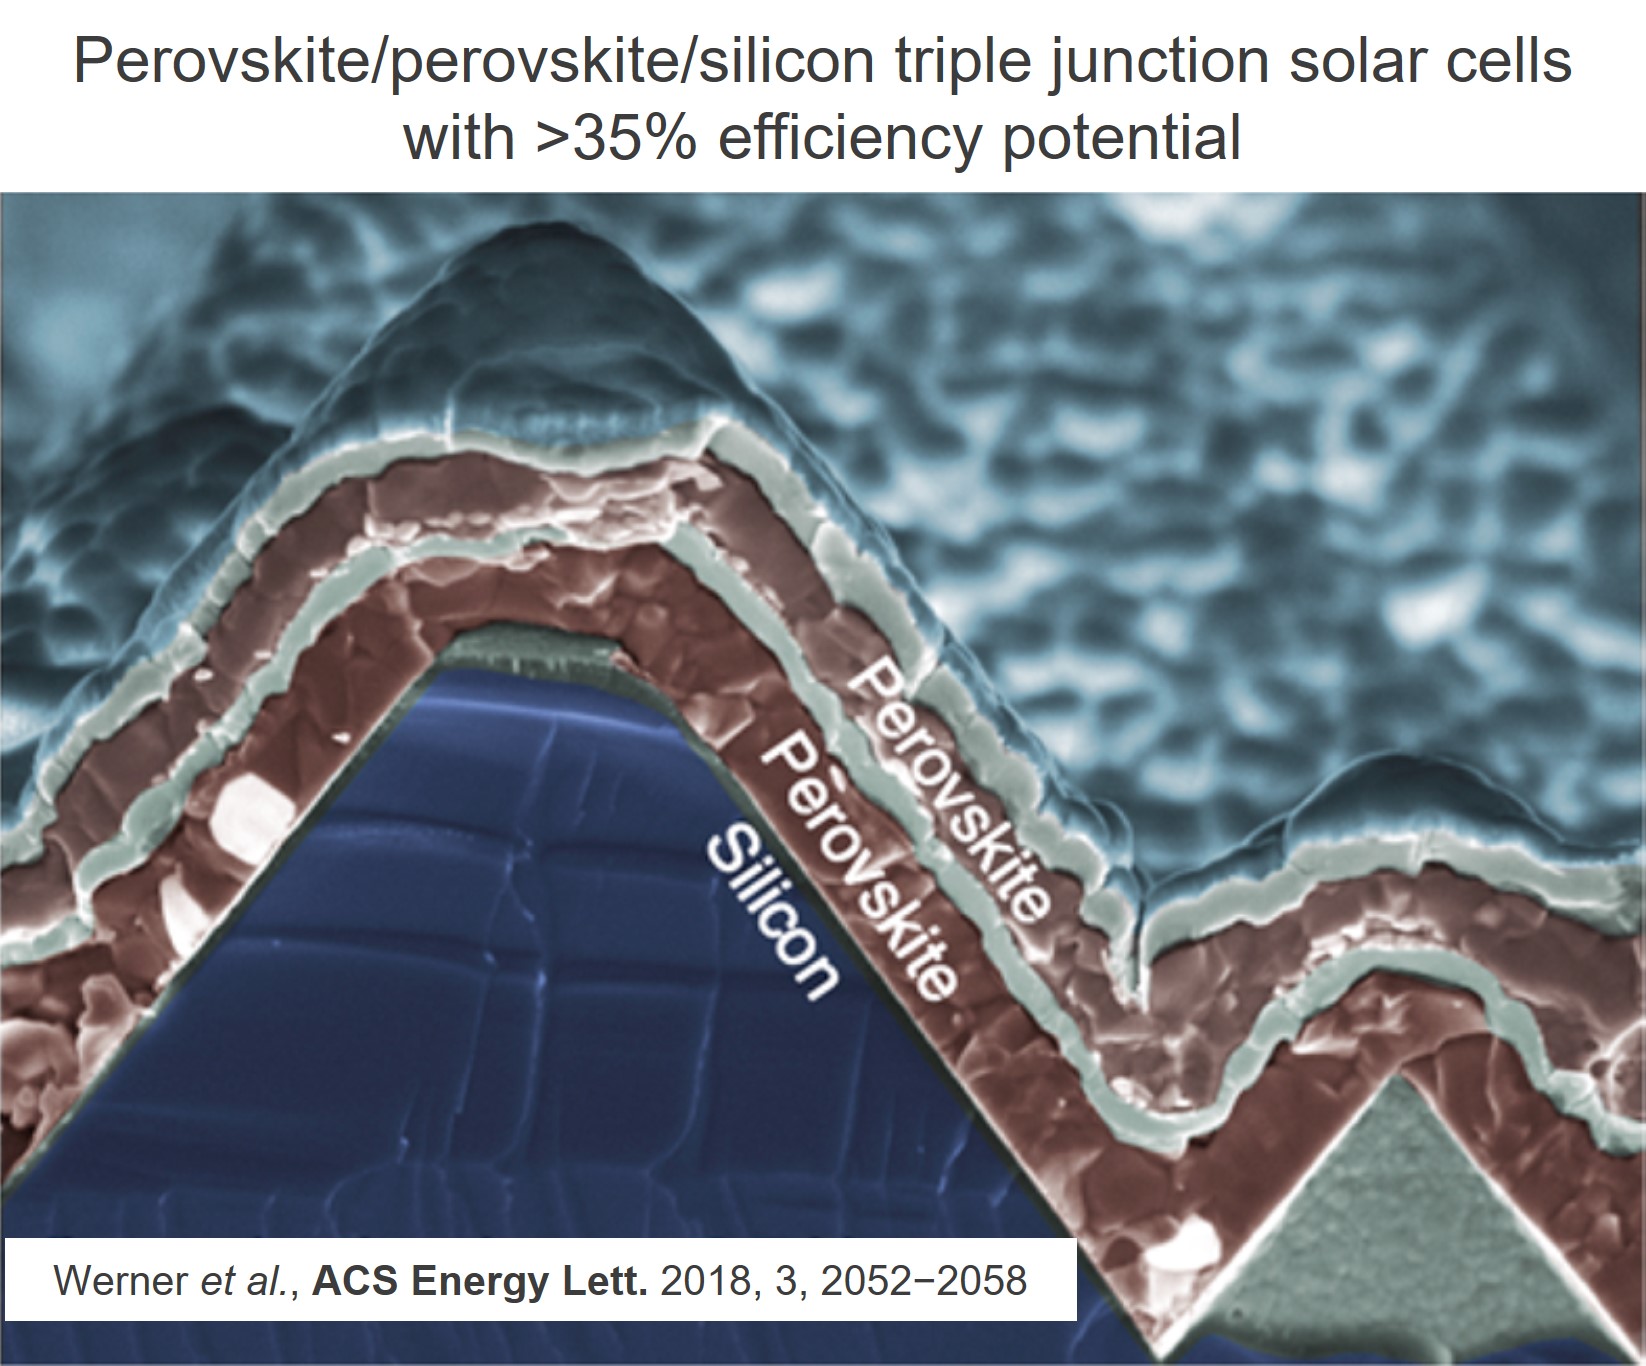 Next-generation high-efficiency triple junction solar cells based on perovskites and silicon